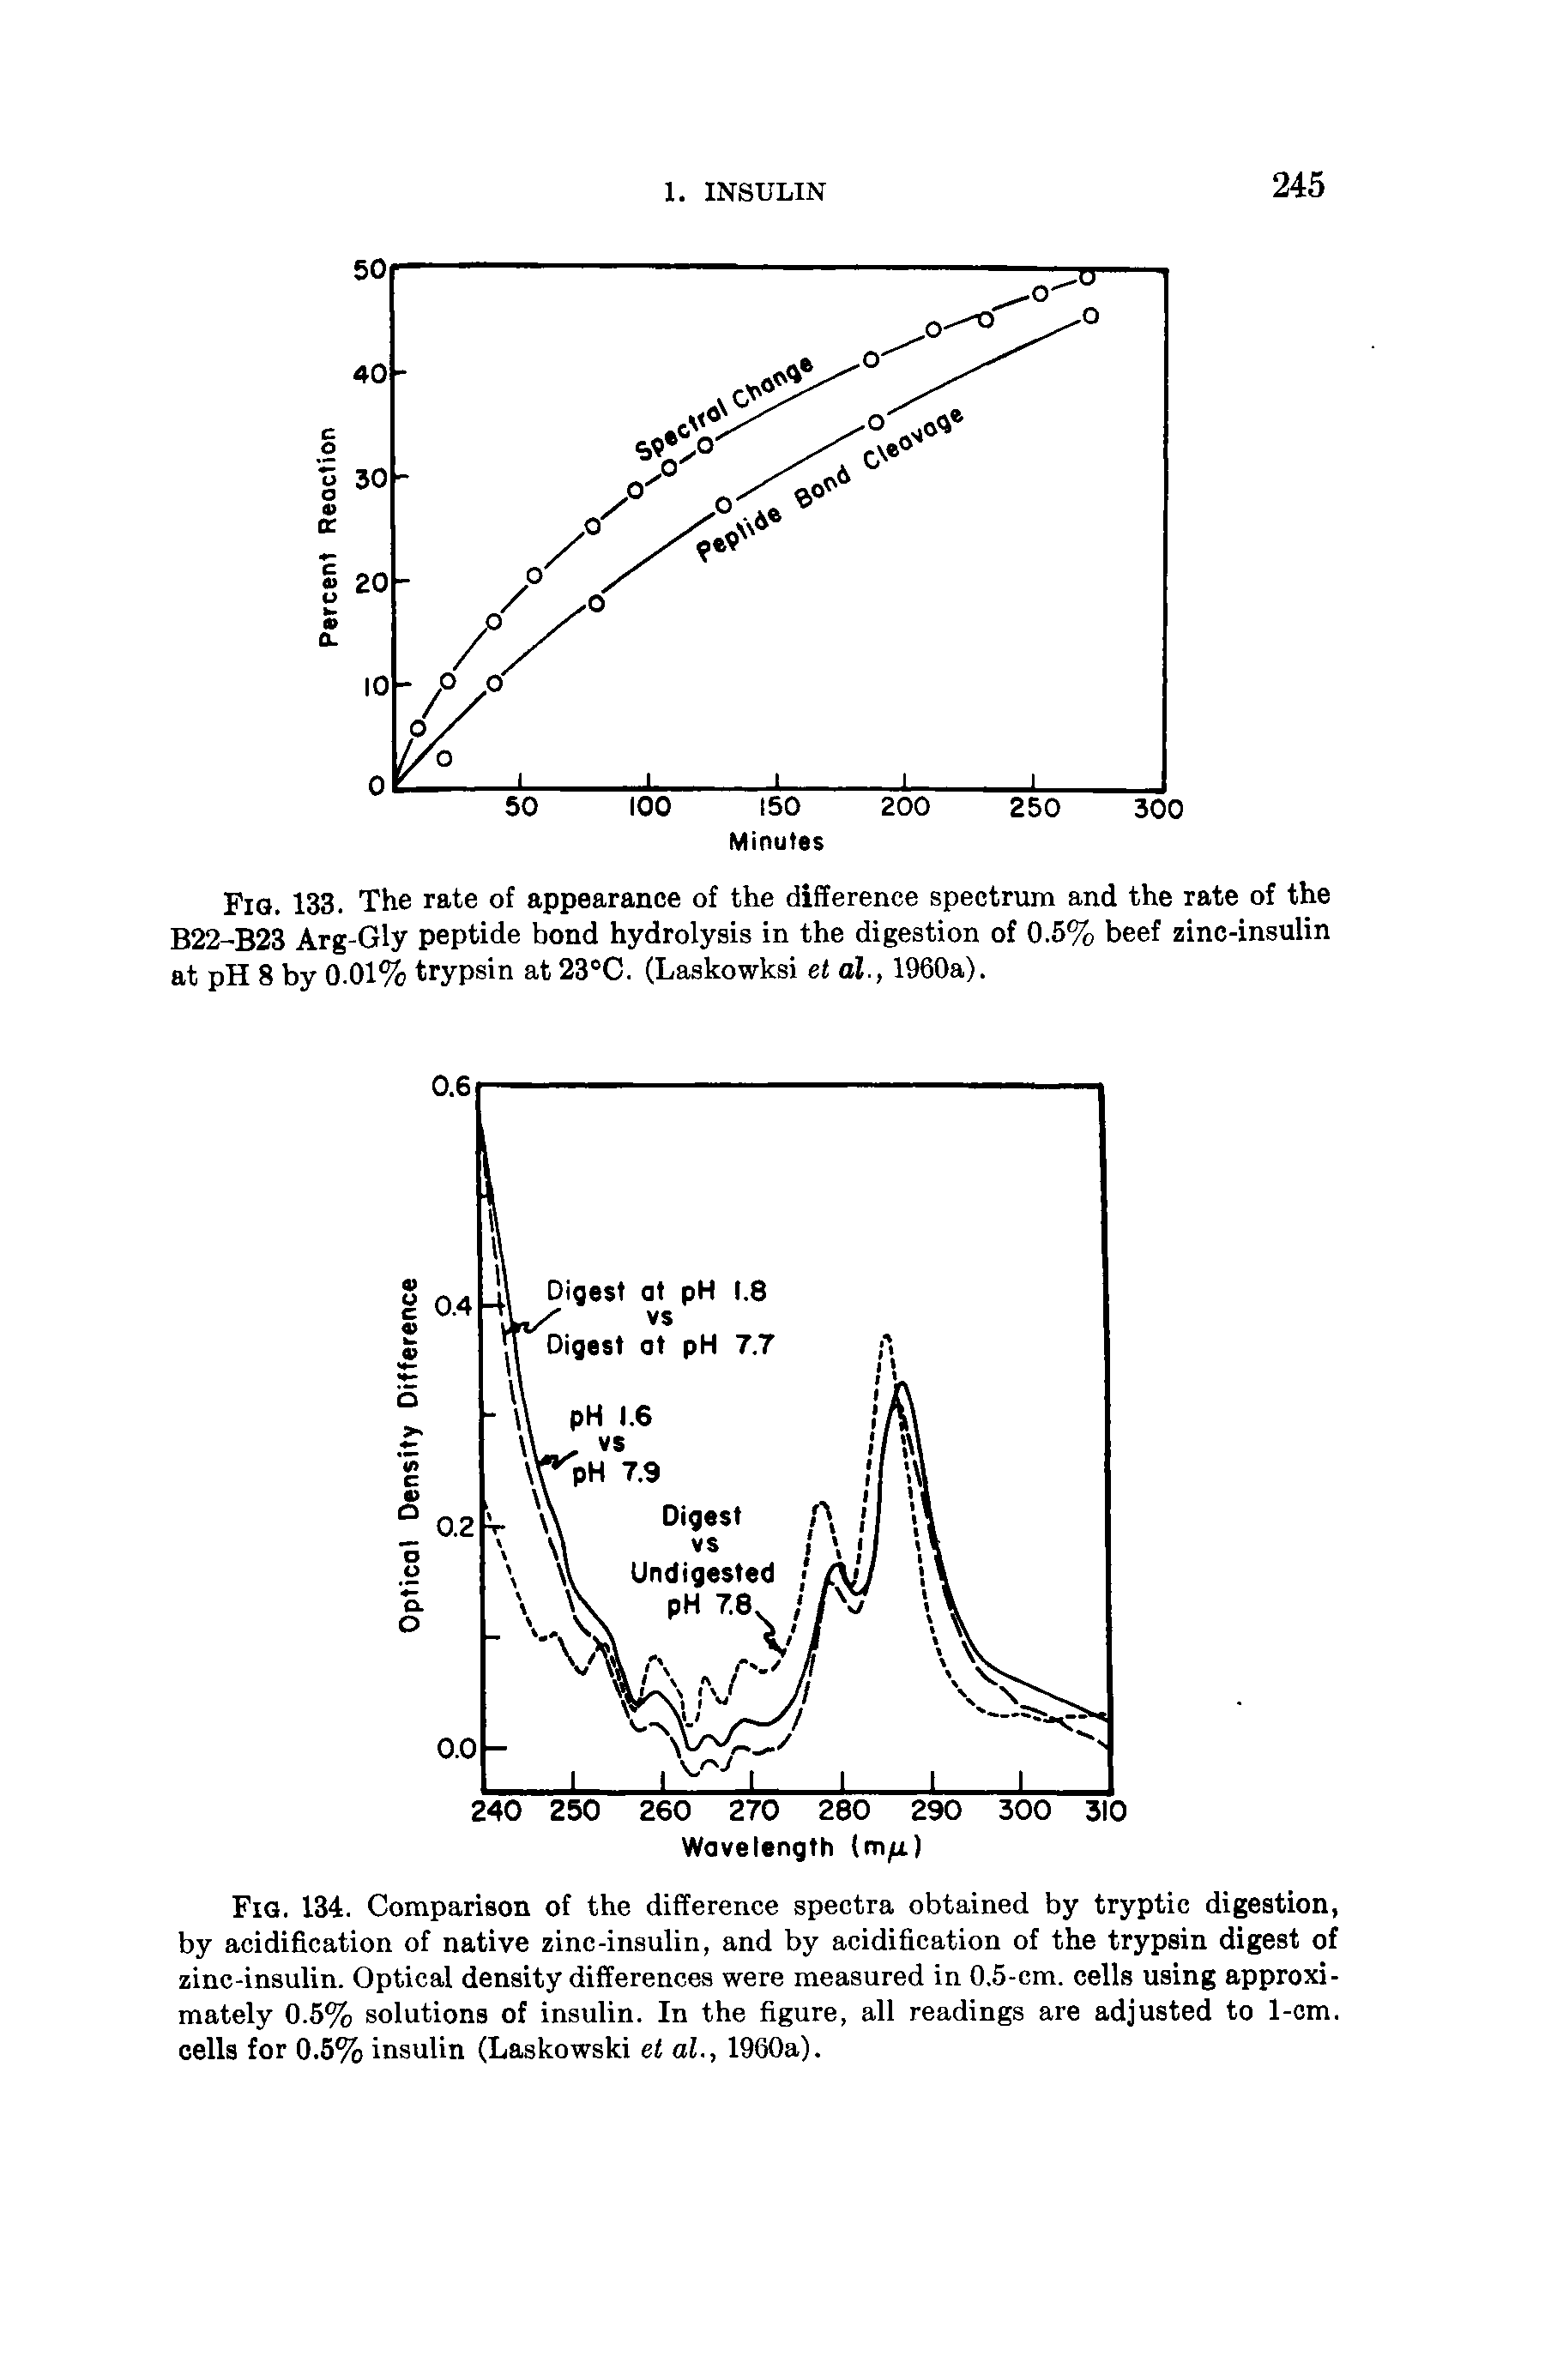 Fig. 133. The rate of appearance of the difference spectrum and the rate of the B22-B23 Arg-Gly peptide bond hydrolysis in the digestion of 0.5% beef zinc-insulin at pH 8 by 0.01% trypsin at 23°C. (Laskowksi ef ol., 1960a).